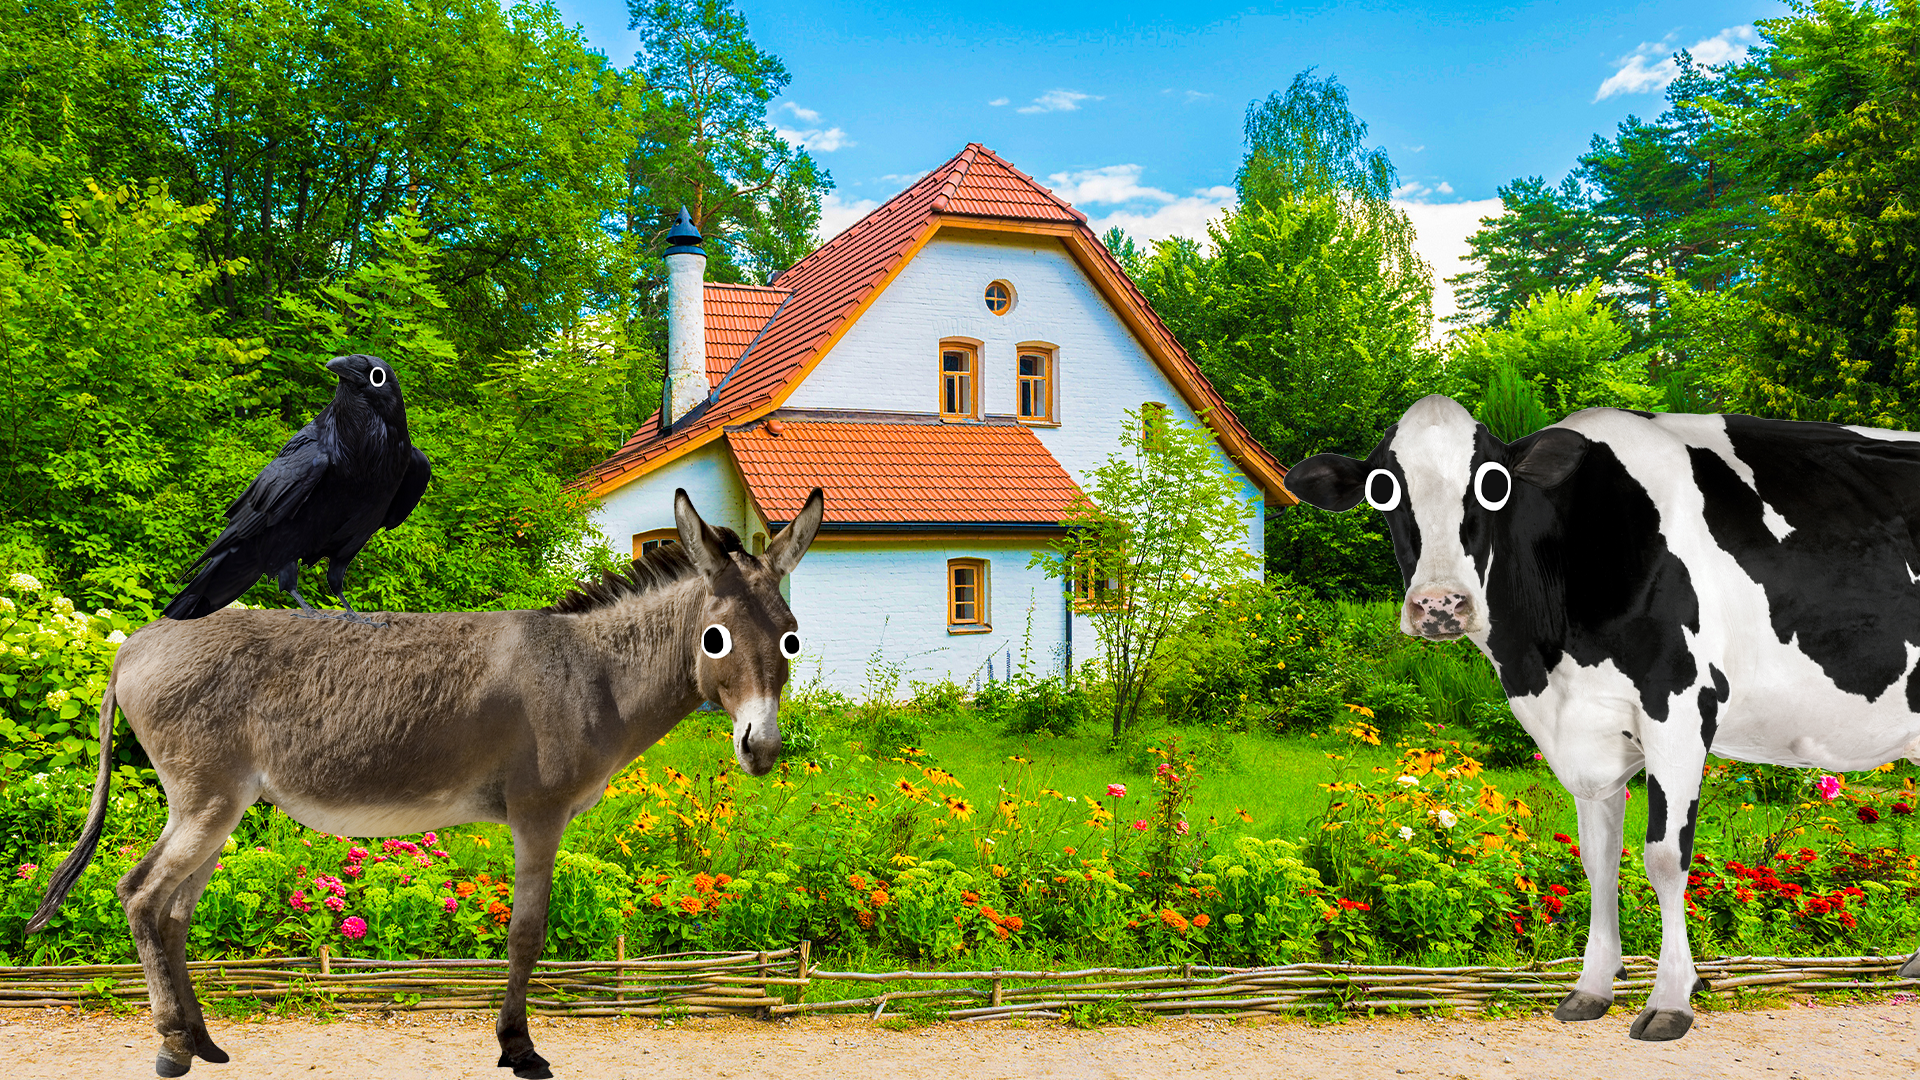 A cute cottage being looked at by a donkey and a cow